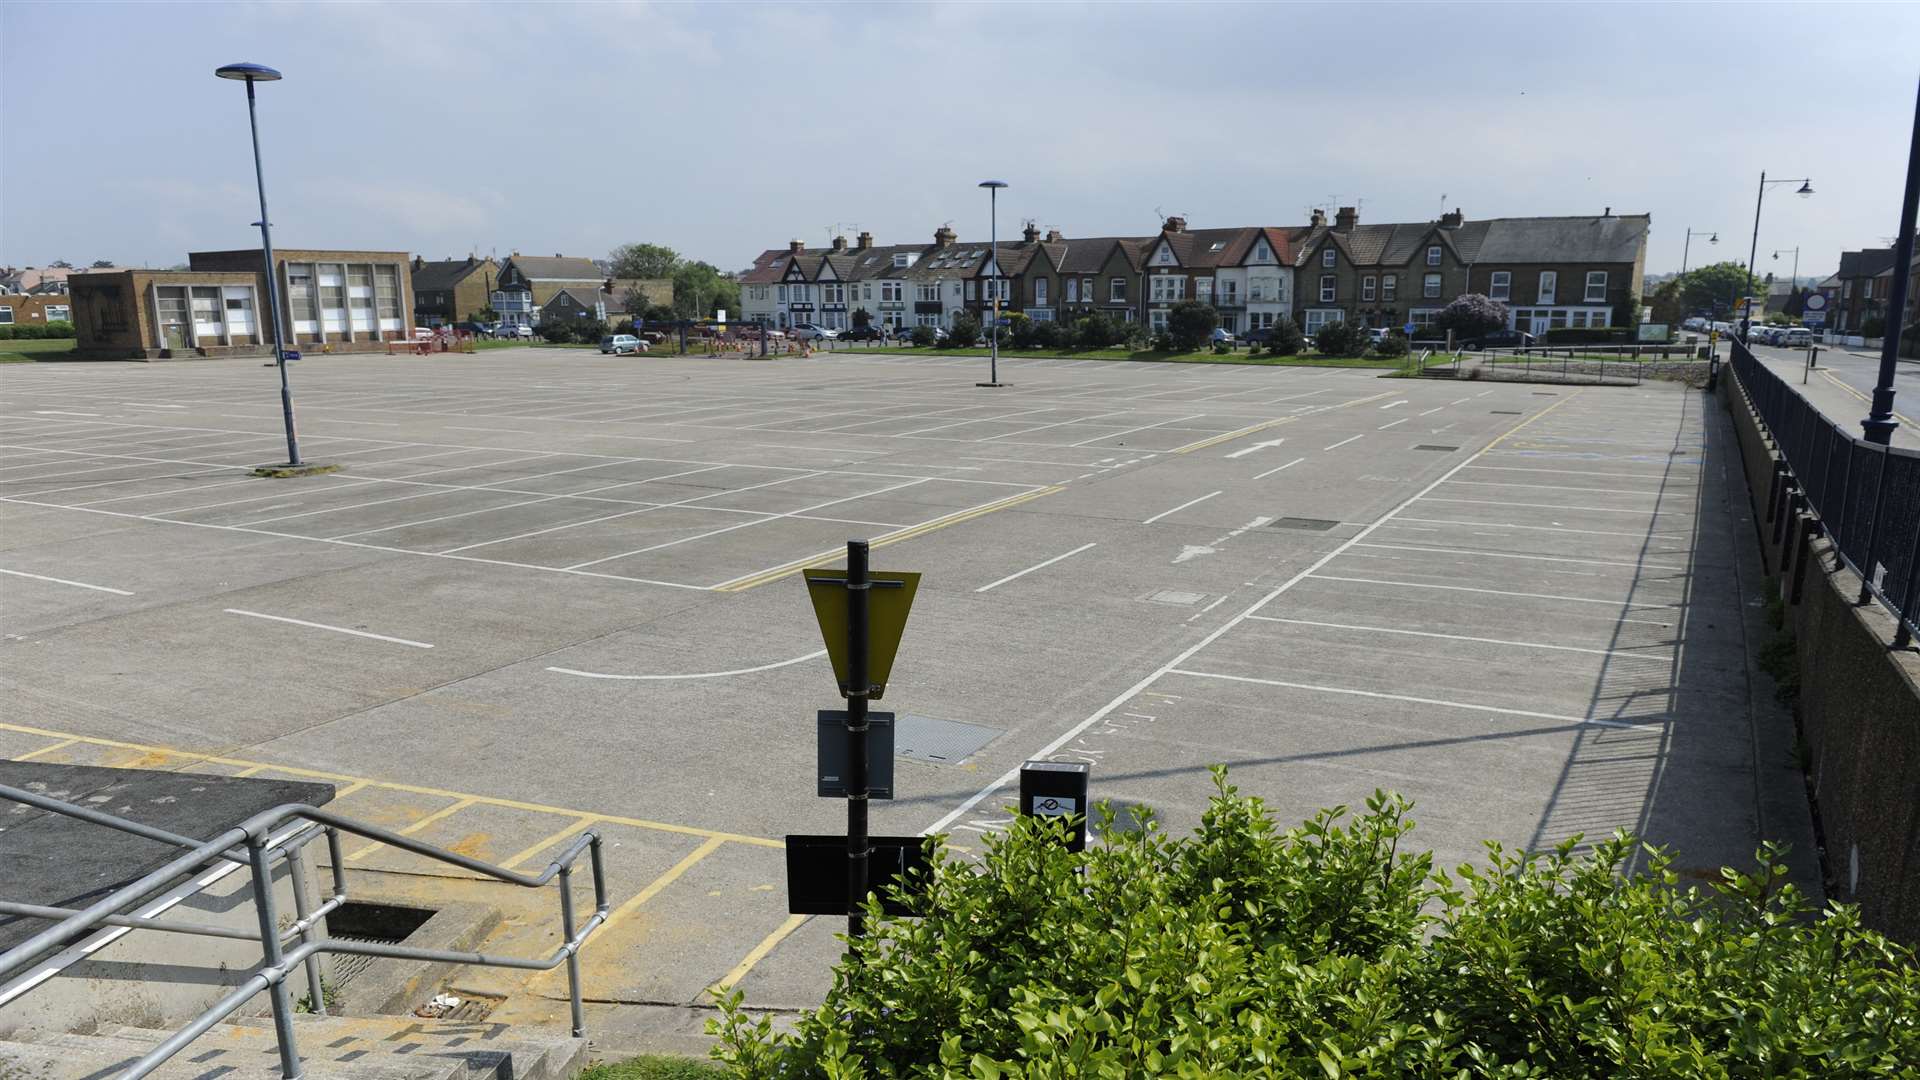 Gorrell Tank car park in Whitstable will become ticketless